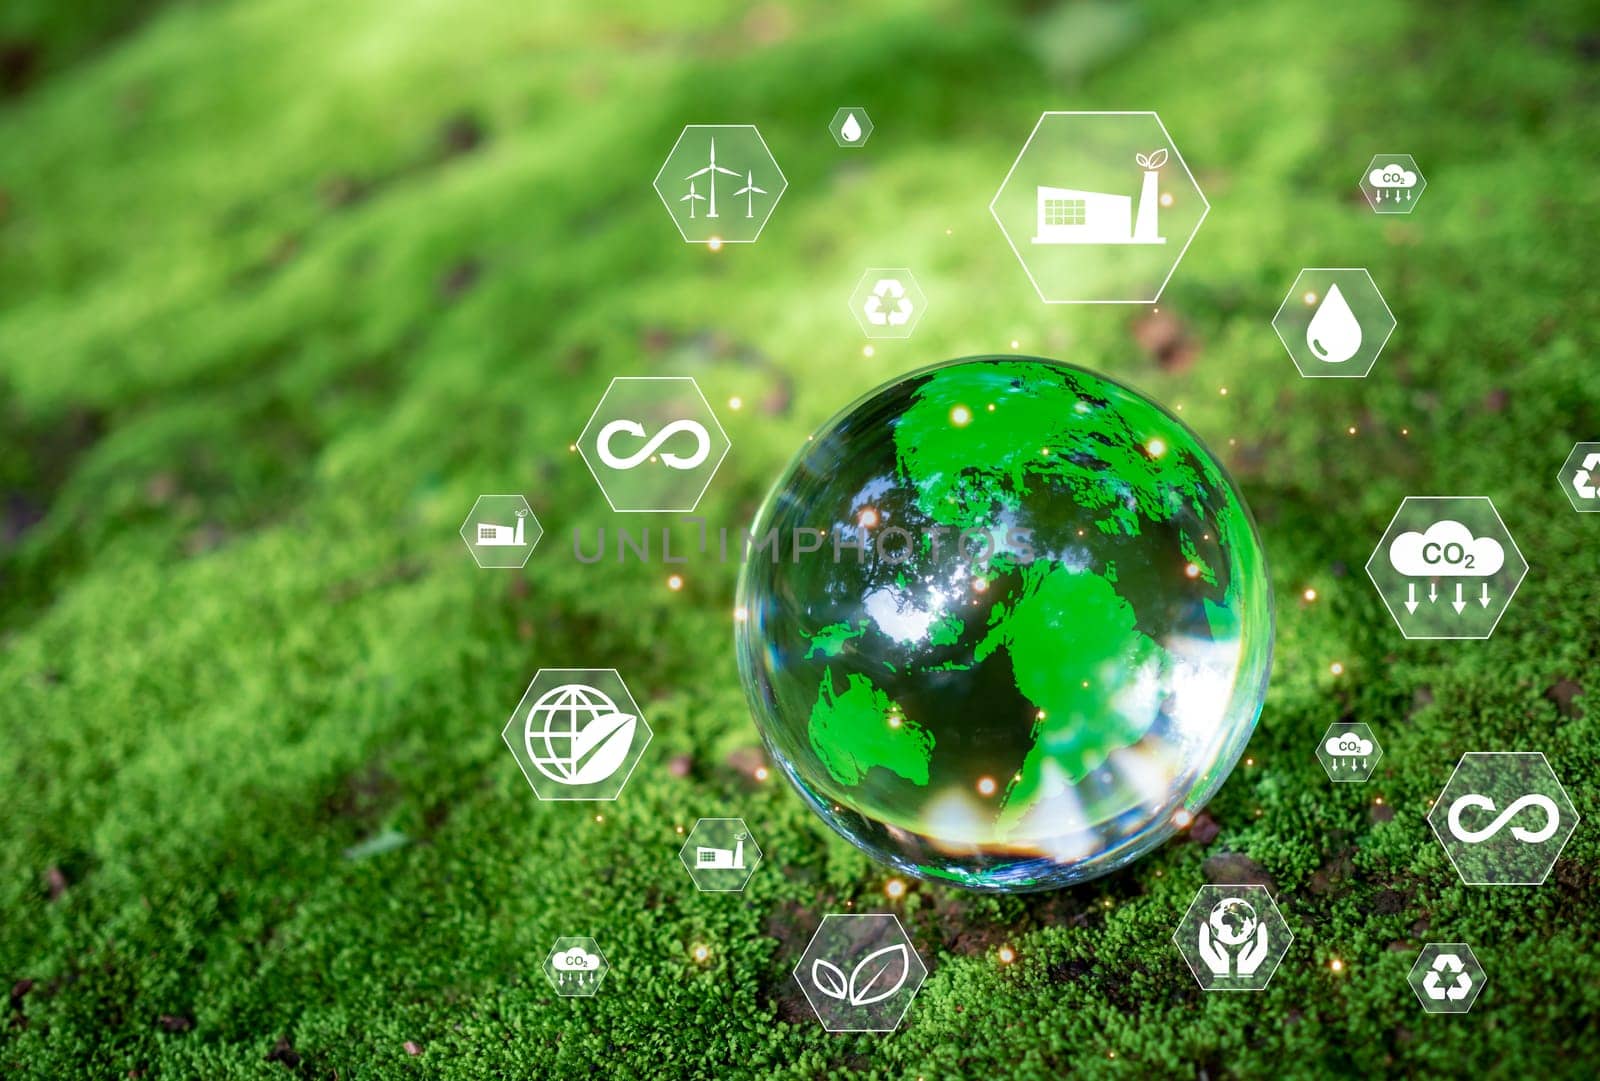 Crystal ball on moss in green forest. CO2 emission reduction concept, clean and friendly environment without carbon dioxide emissions. Planting trees to reduce CO2 emissions, environmental protection concept. by Unimages2527